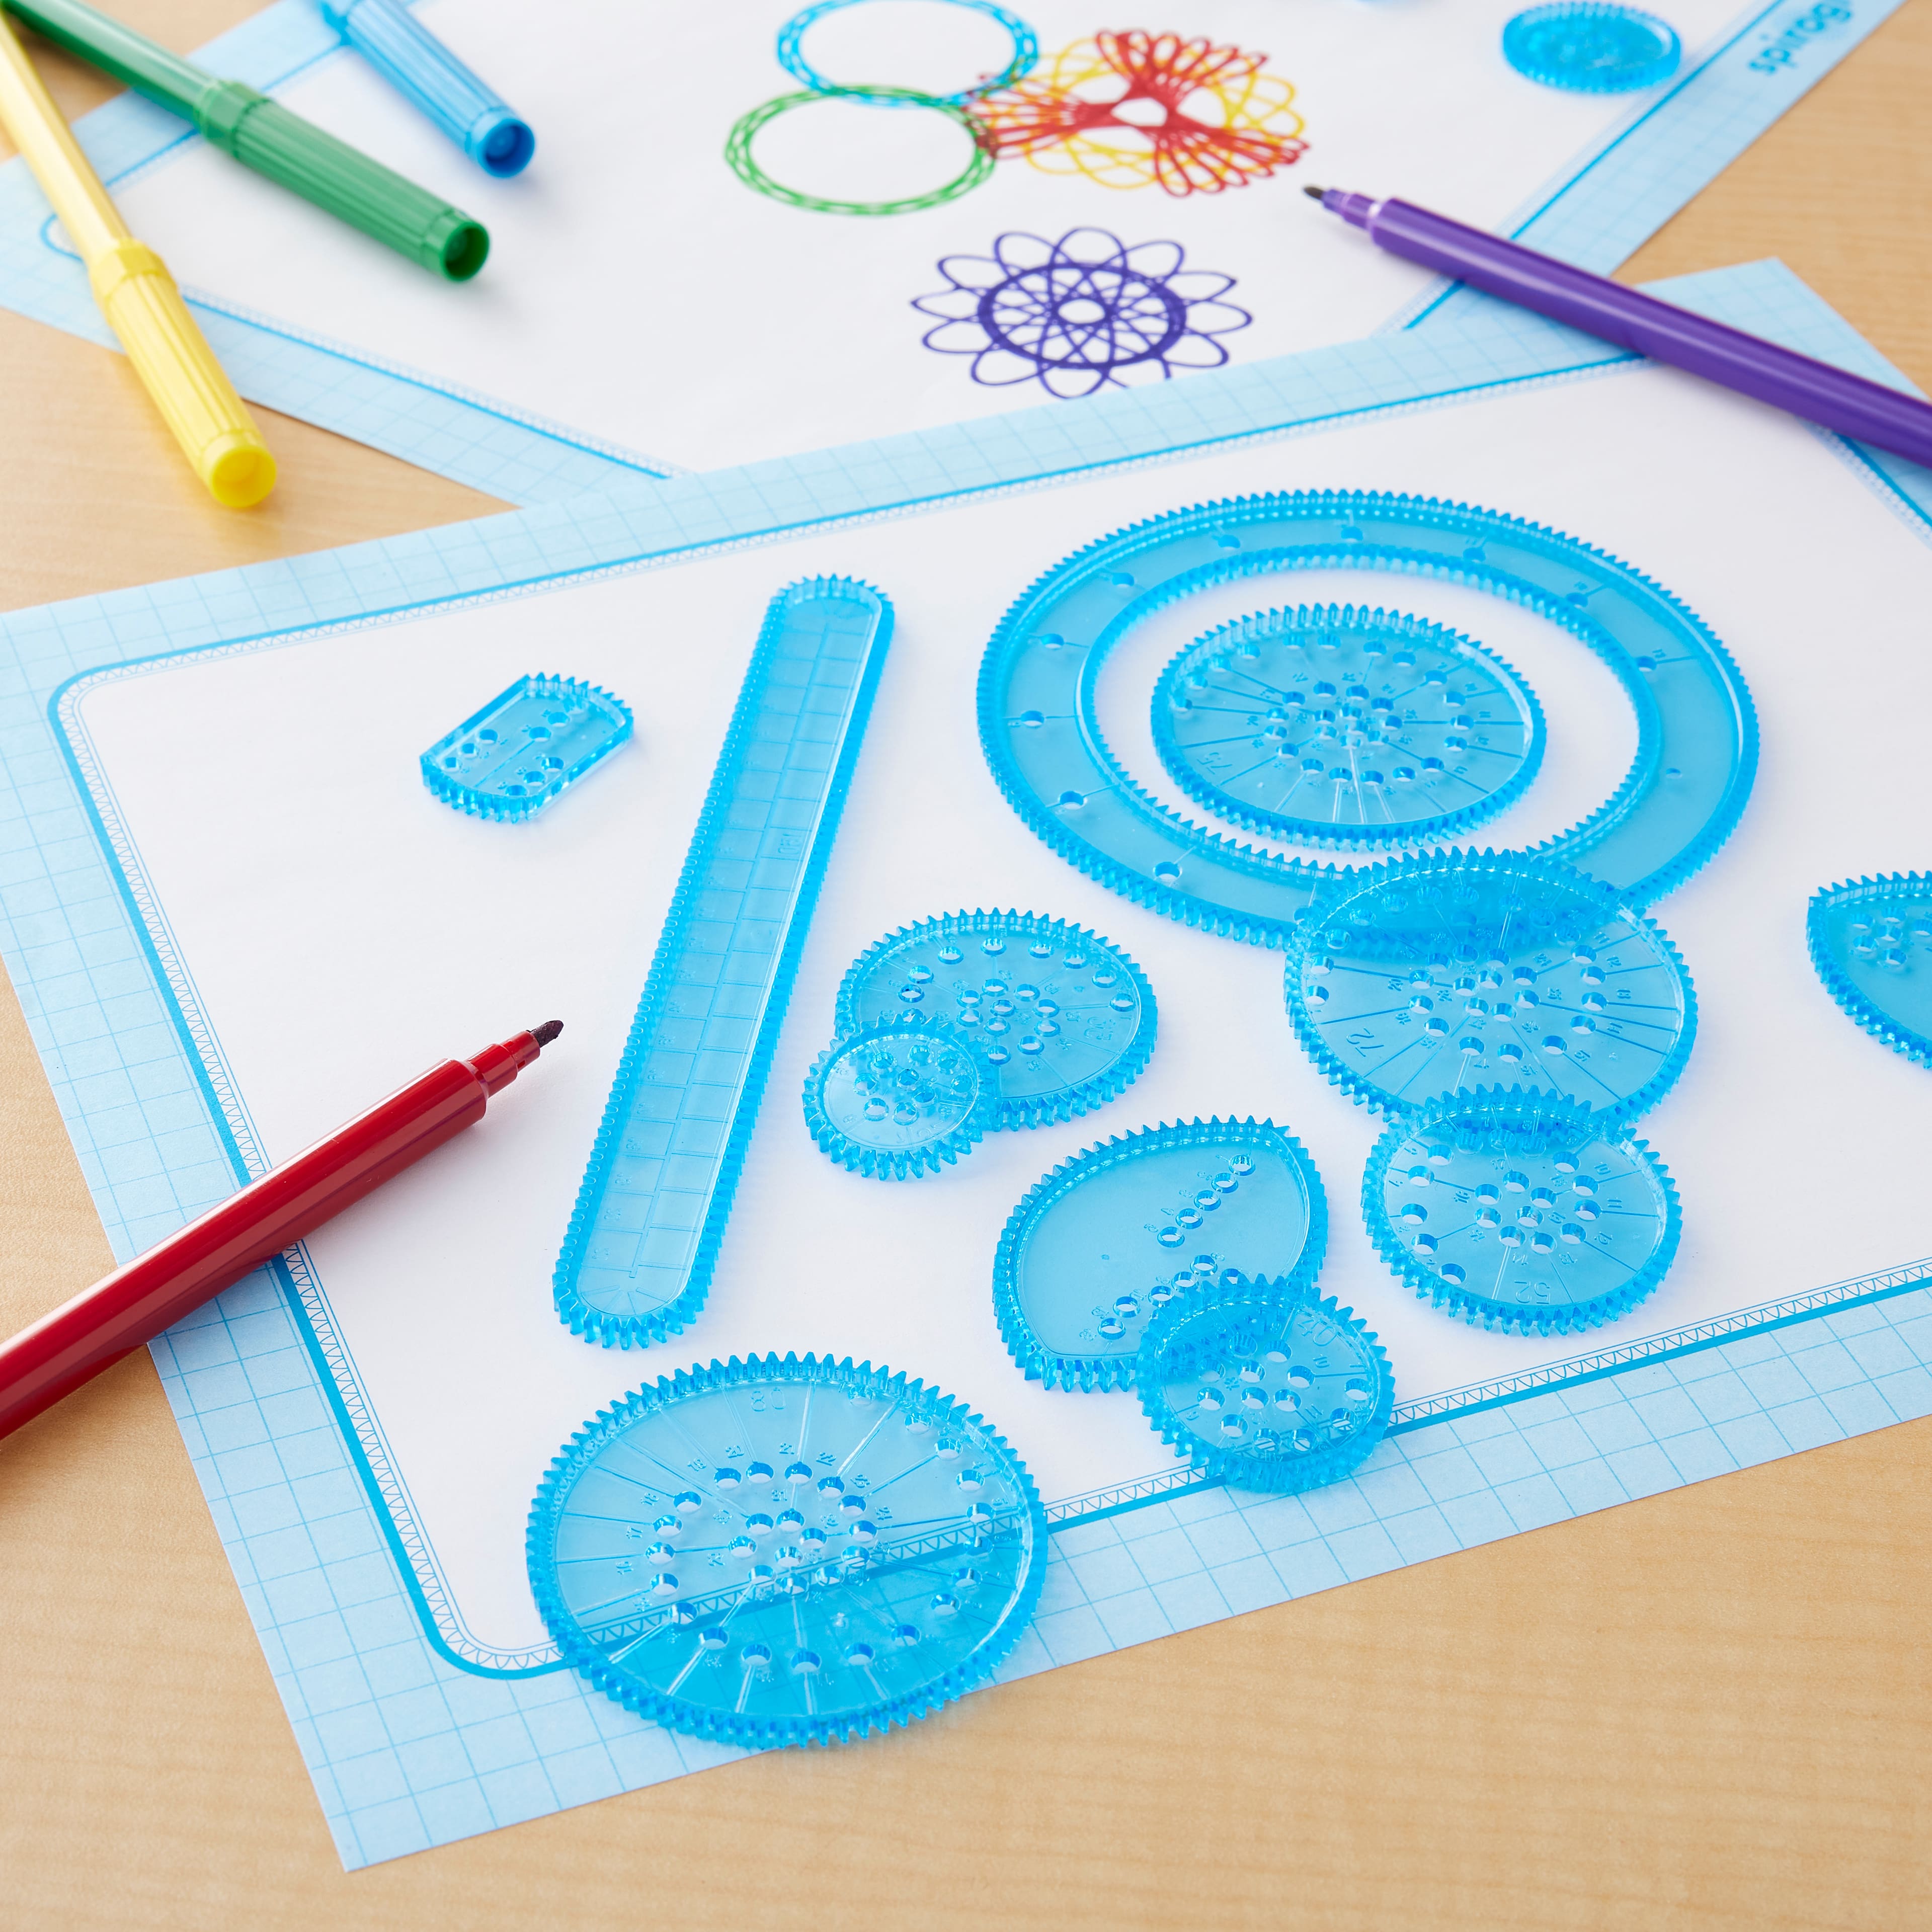 The Original Spirograph&#xAE; Design Set With Markers